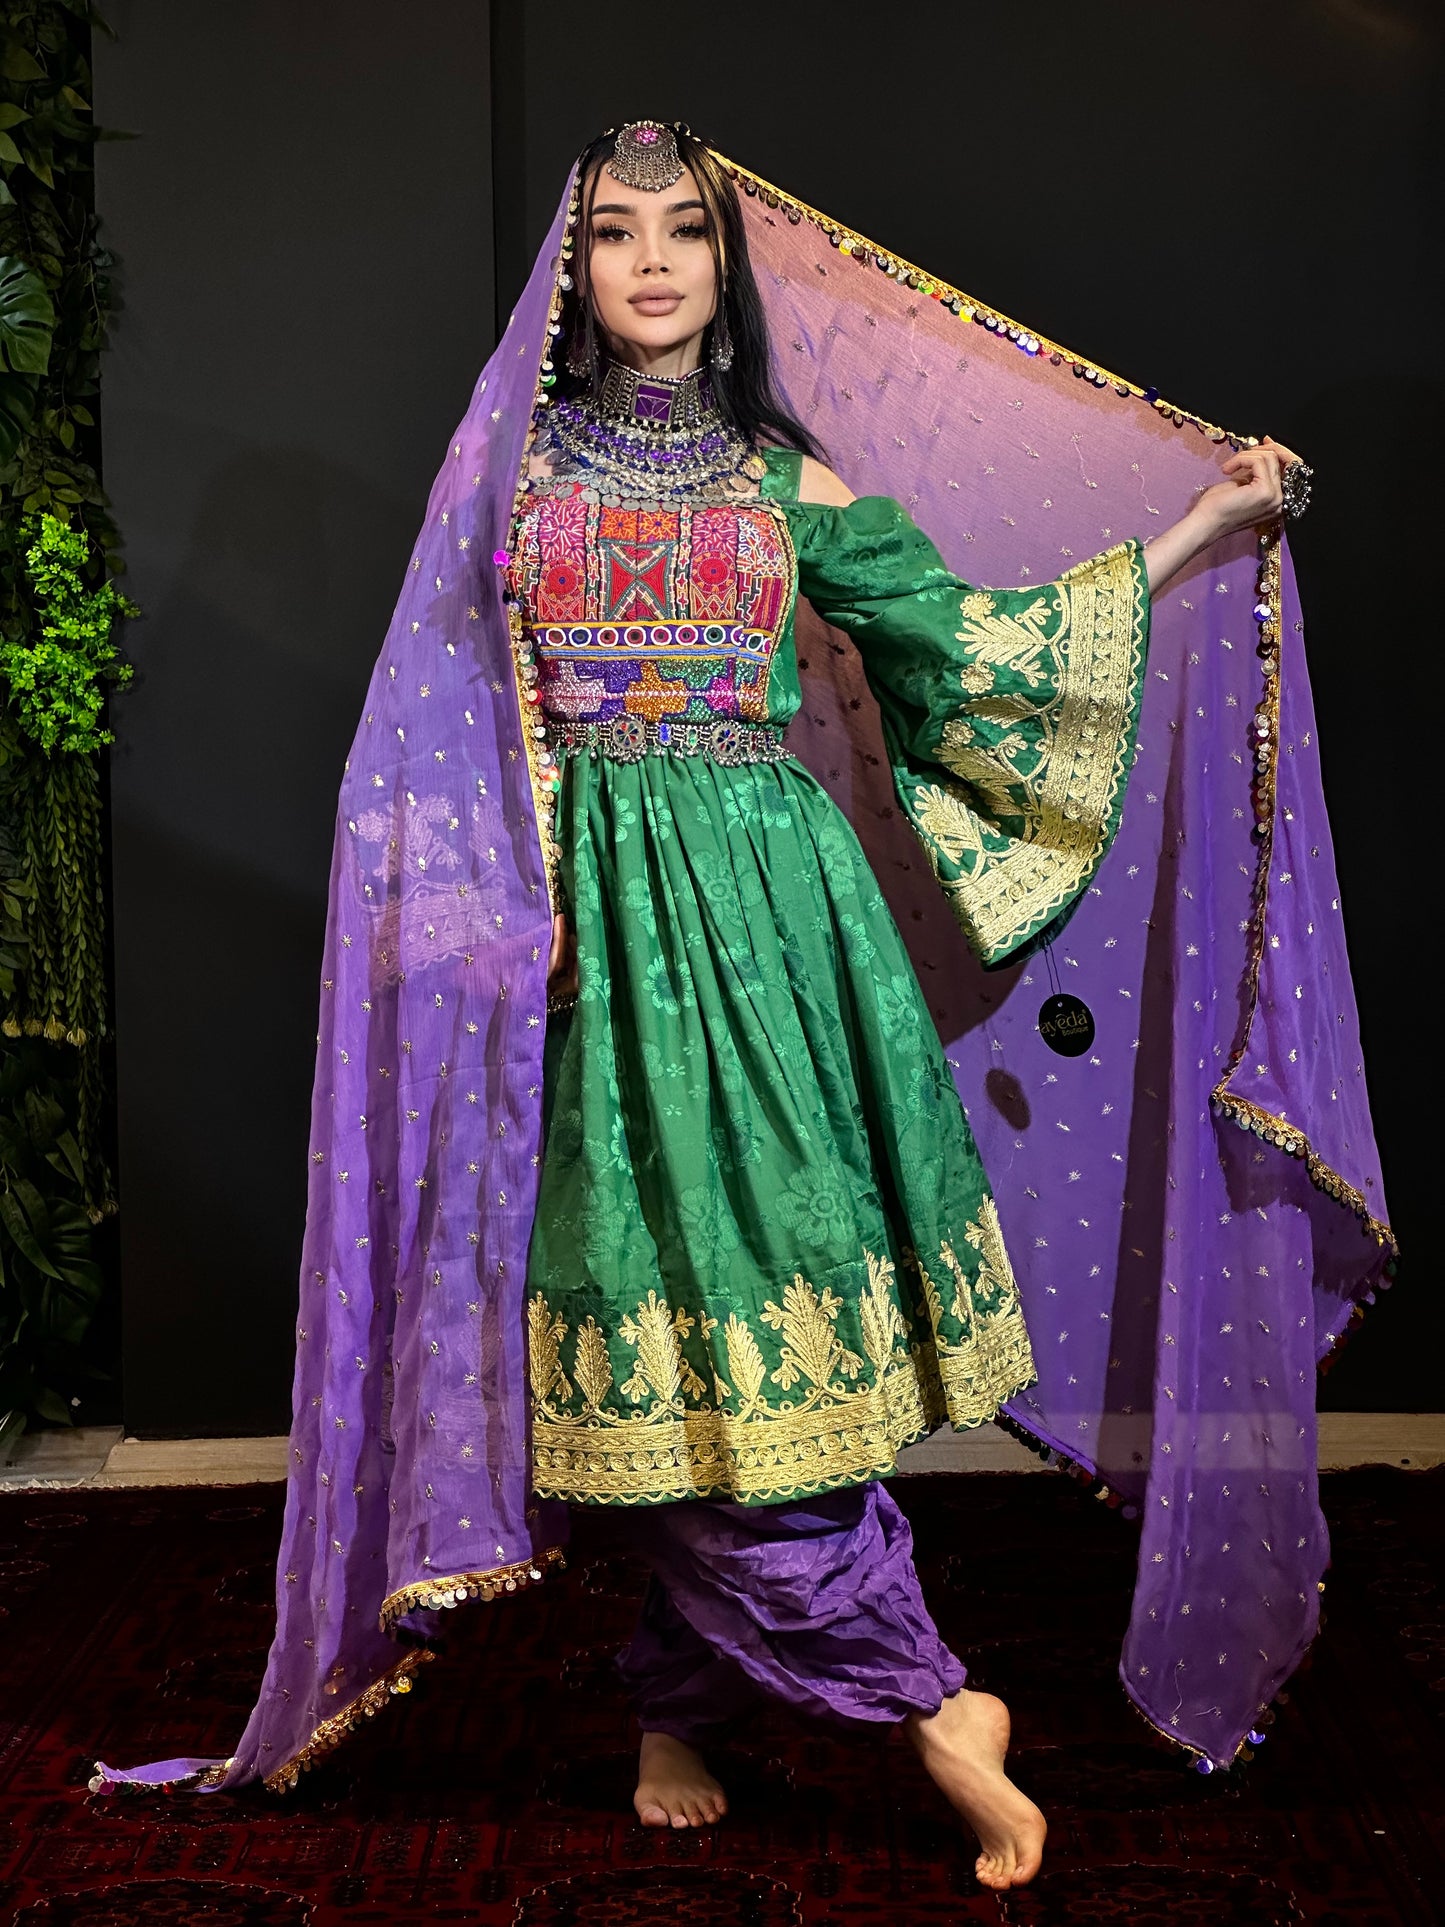 Green dress short afghani with purple scarf and pant